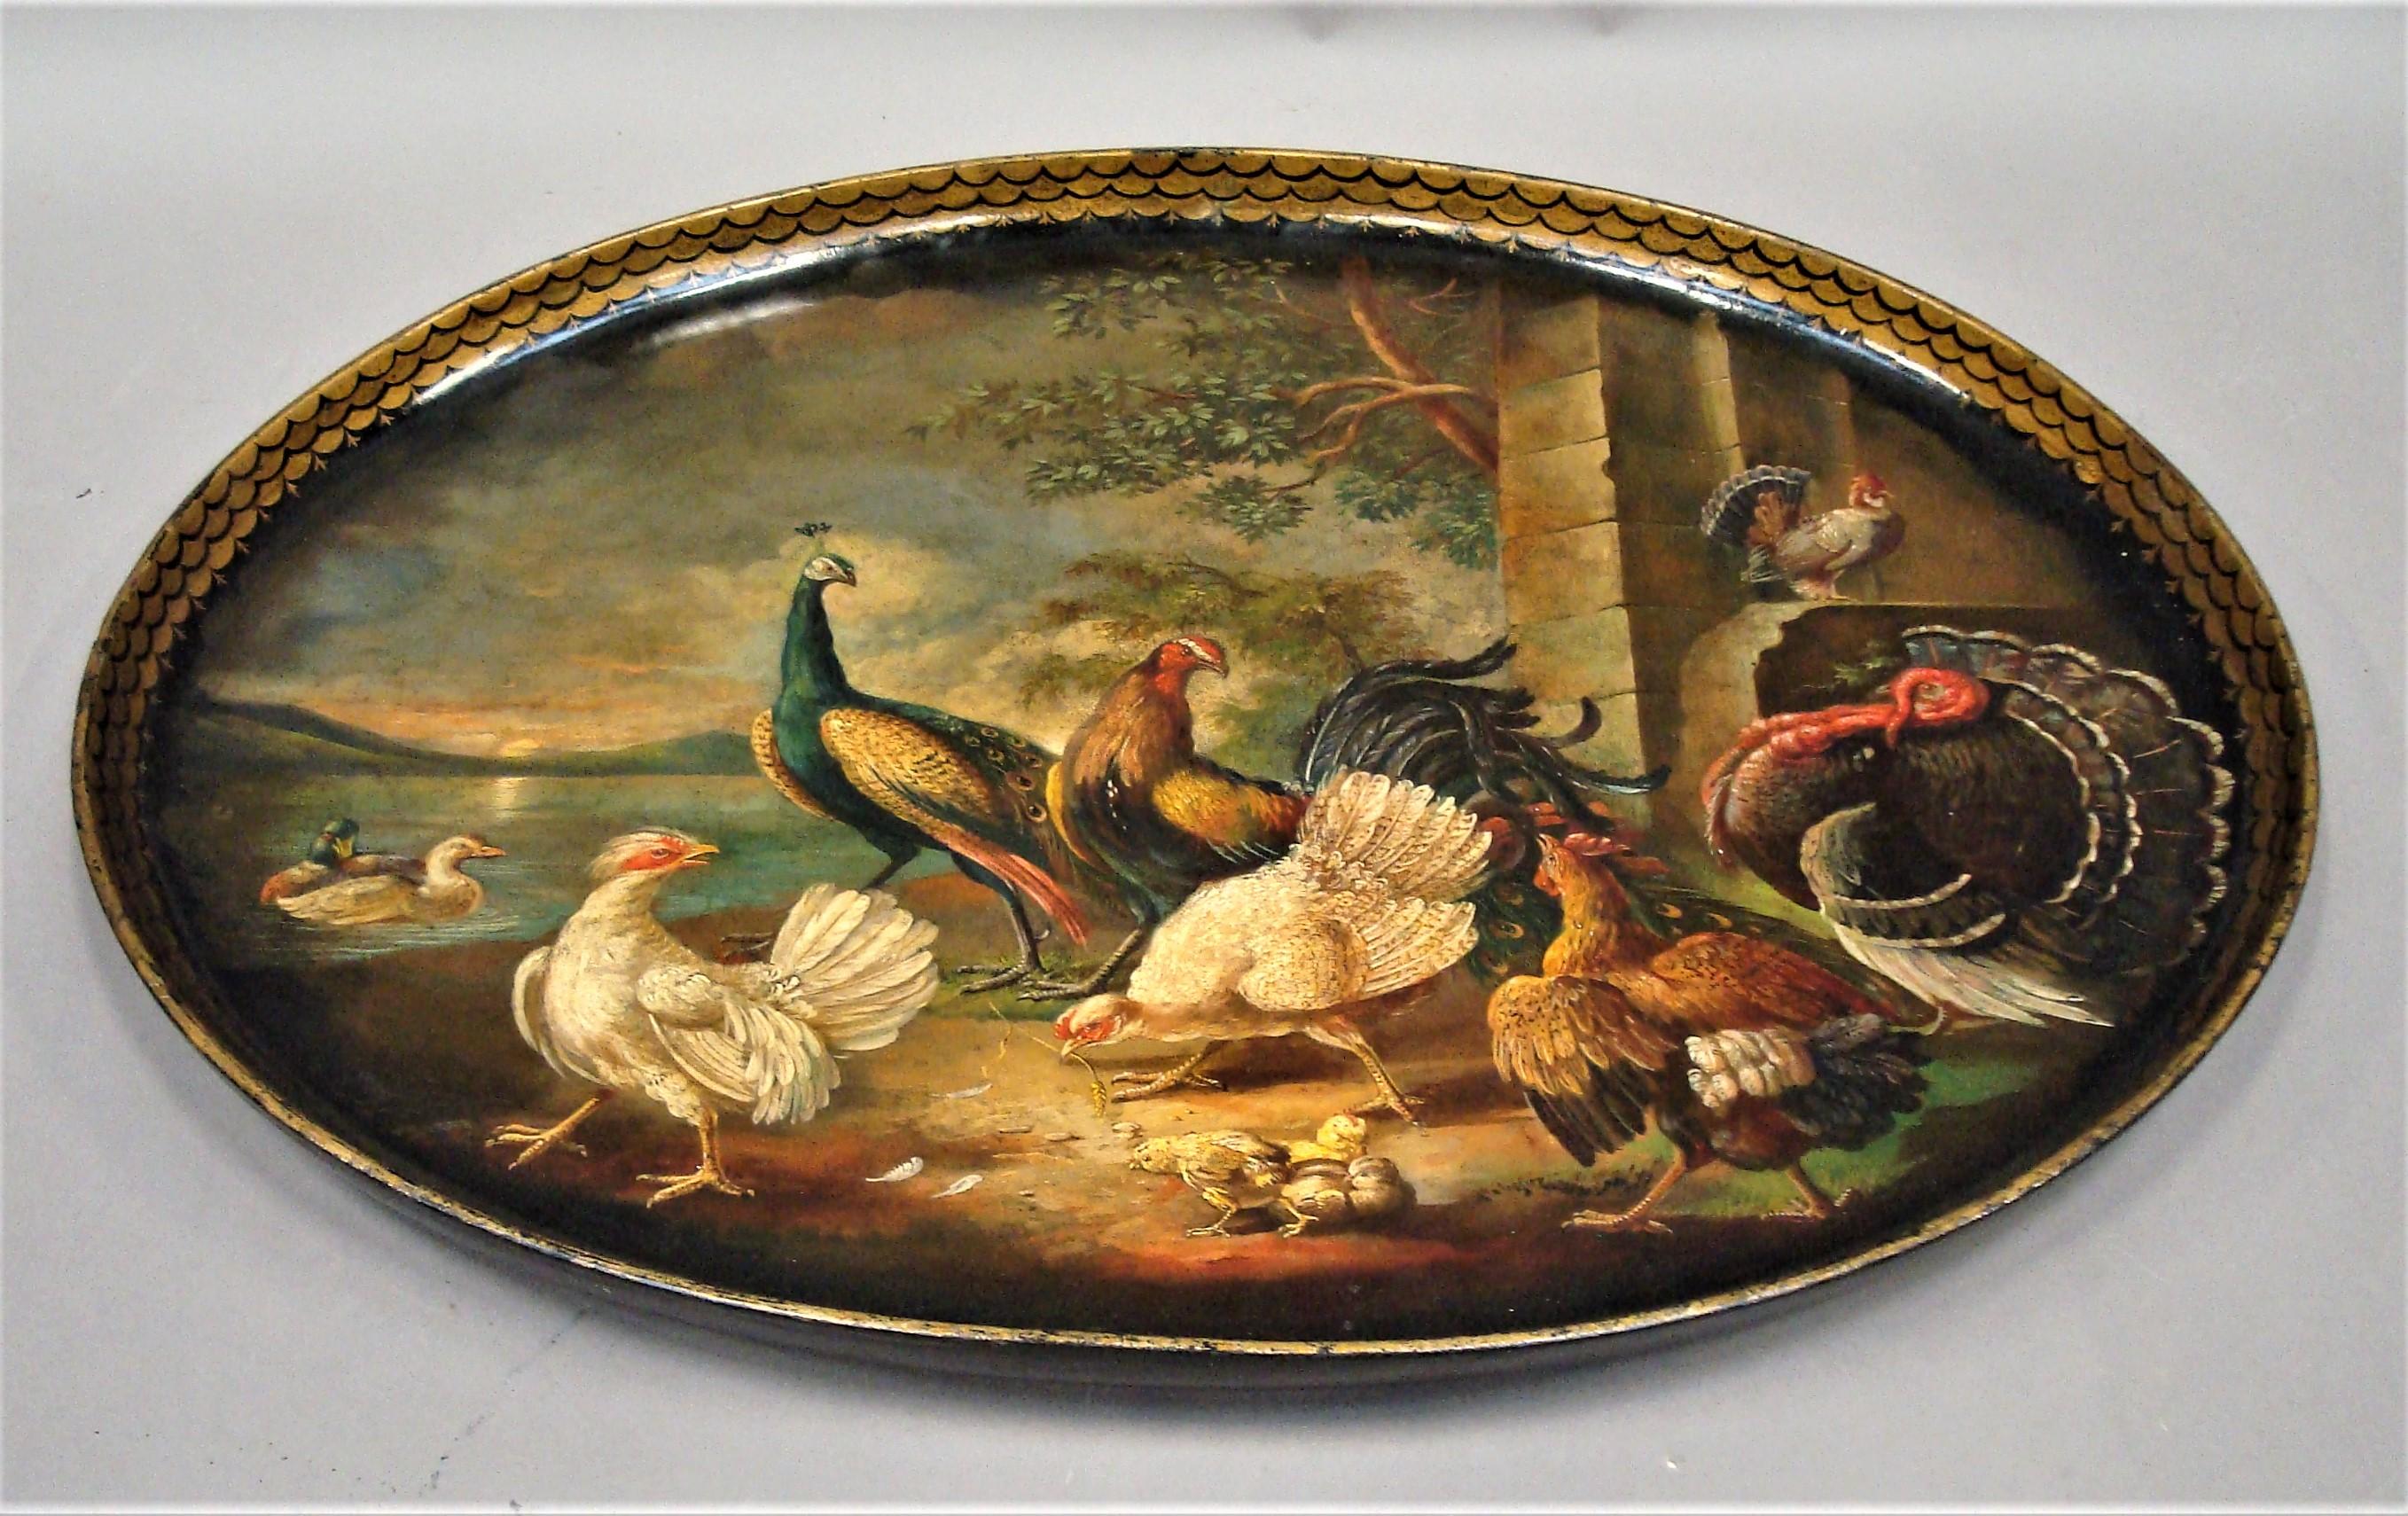 Exceptional Regency Papier Mâché tray of oval form; the raised edge decorated with a gilt fish scale design surrounding a finely painted scene of peacocks turkeys and hens with chicks in a classical landscape setting with a stone building with ducks